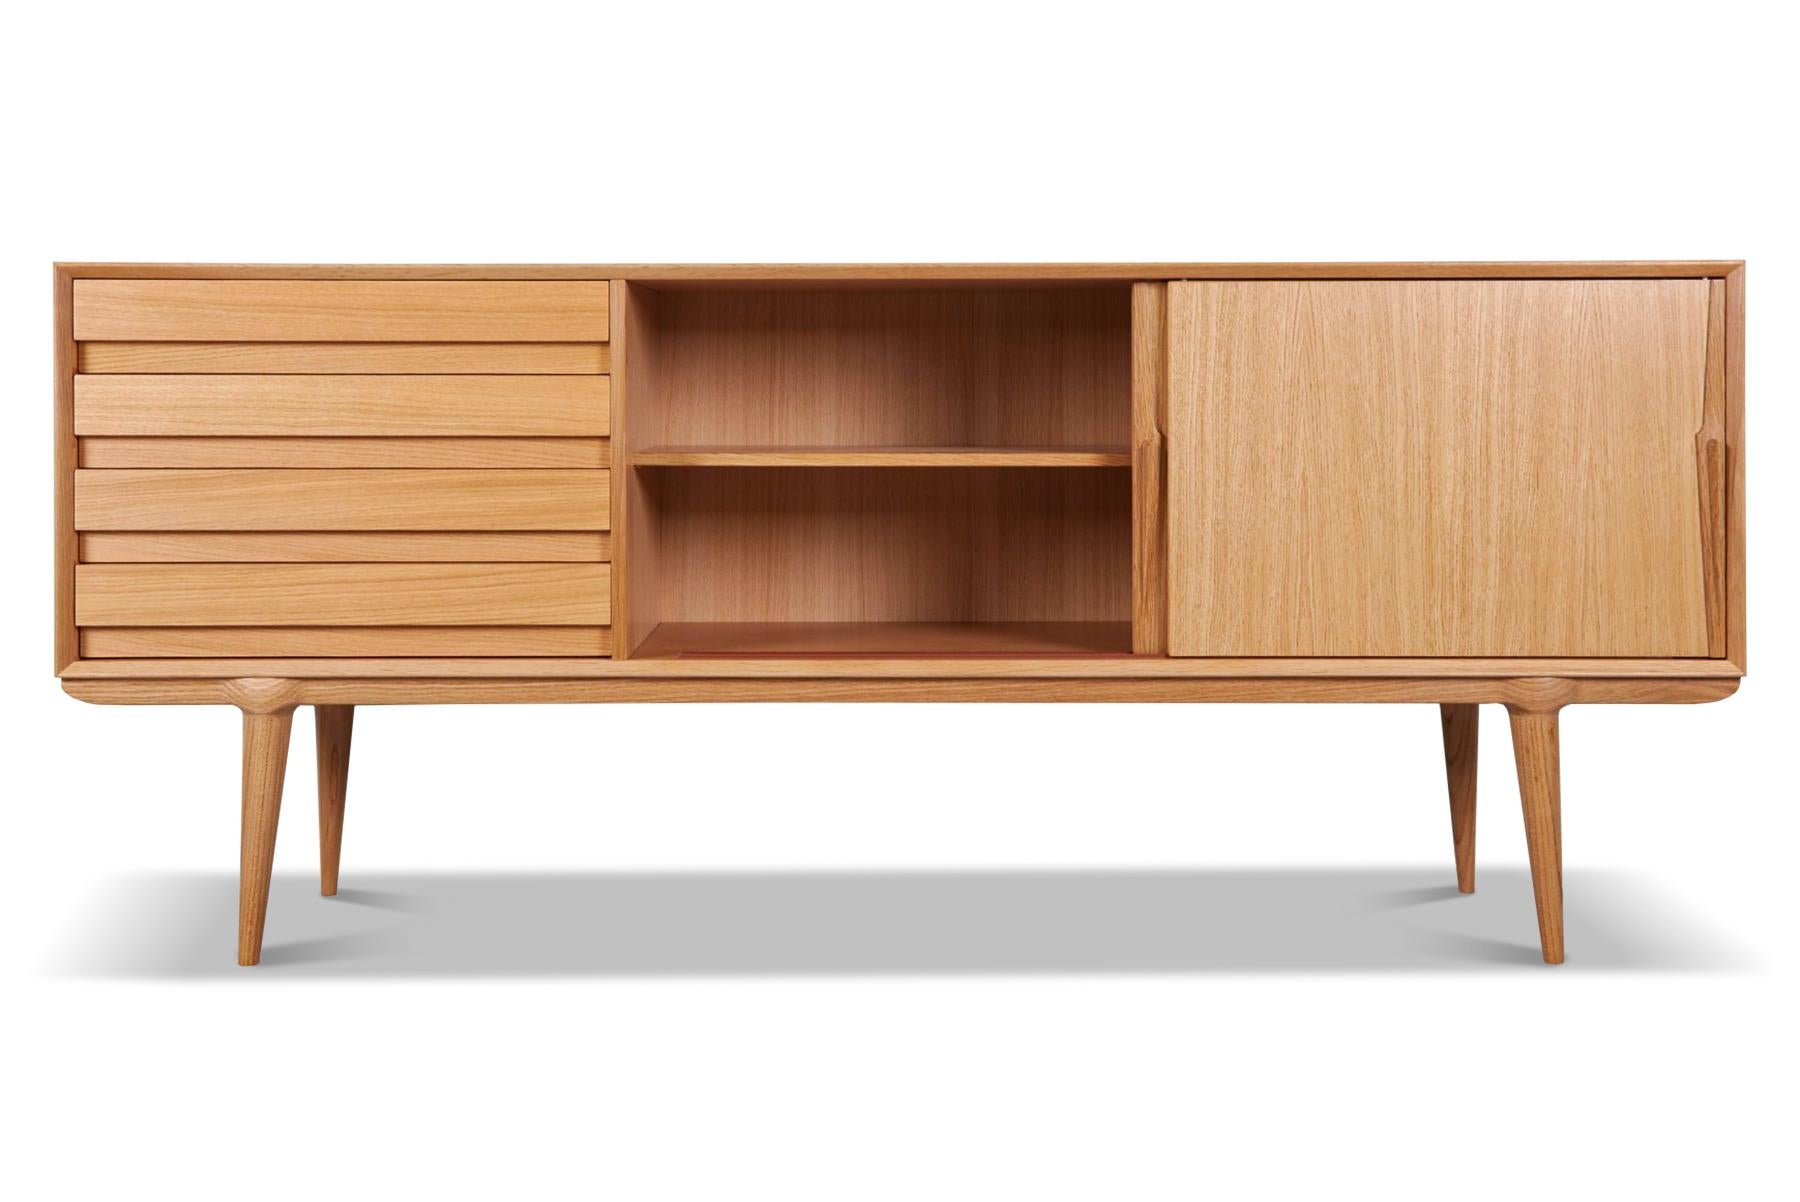 Omann Jun Møbelfabrik (founded in 1933 by Andreas Omann), produced some of the most iconic Danish designs of the 1950s and 1960s. In production again for the first time, this family owned company has re-issued the classic Model 18 credenza for a new